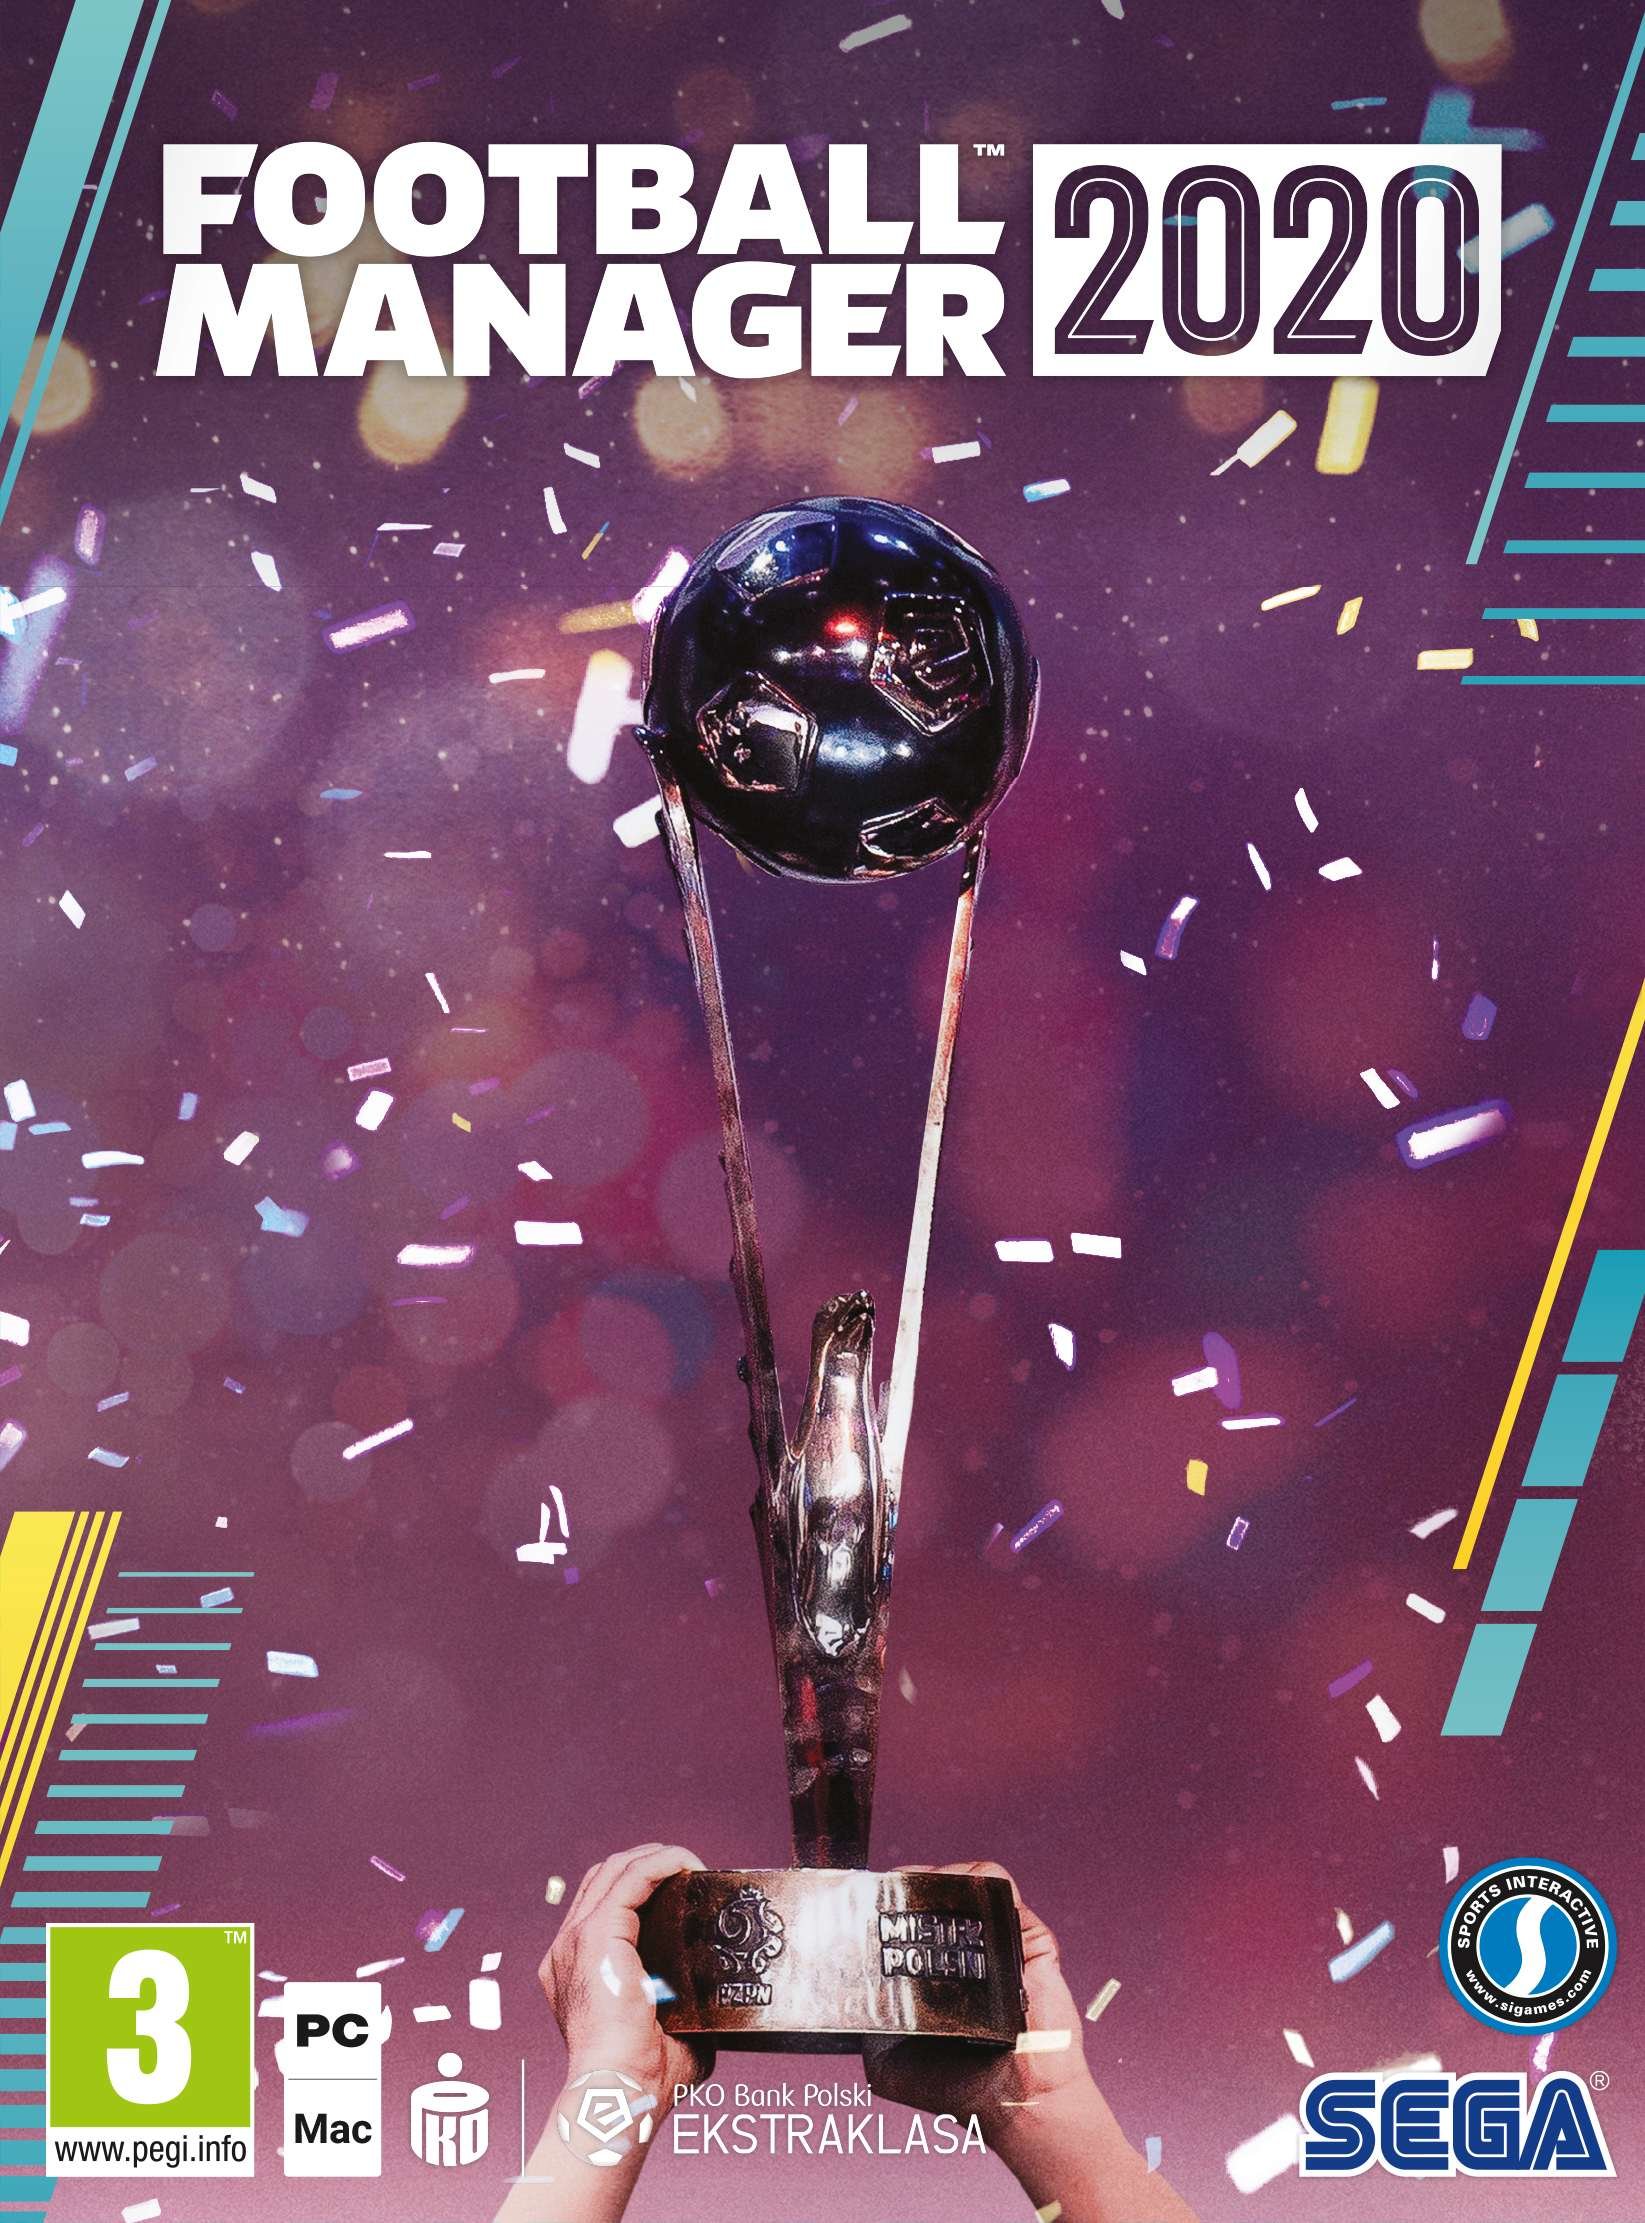 football manager 2020 joueur libre